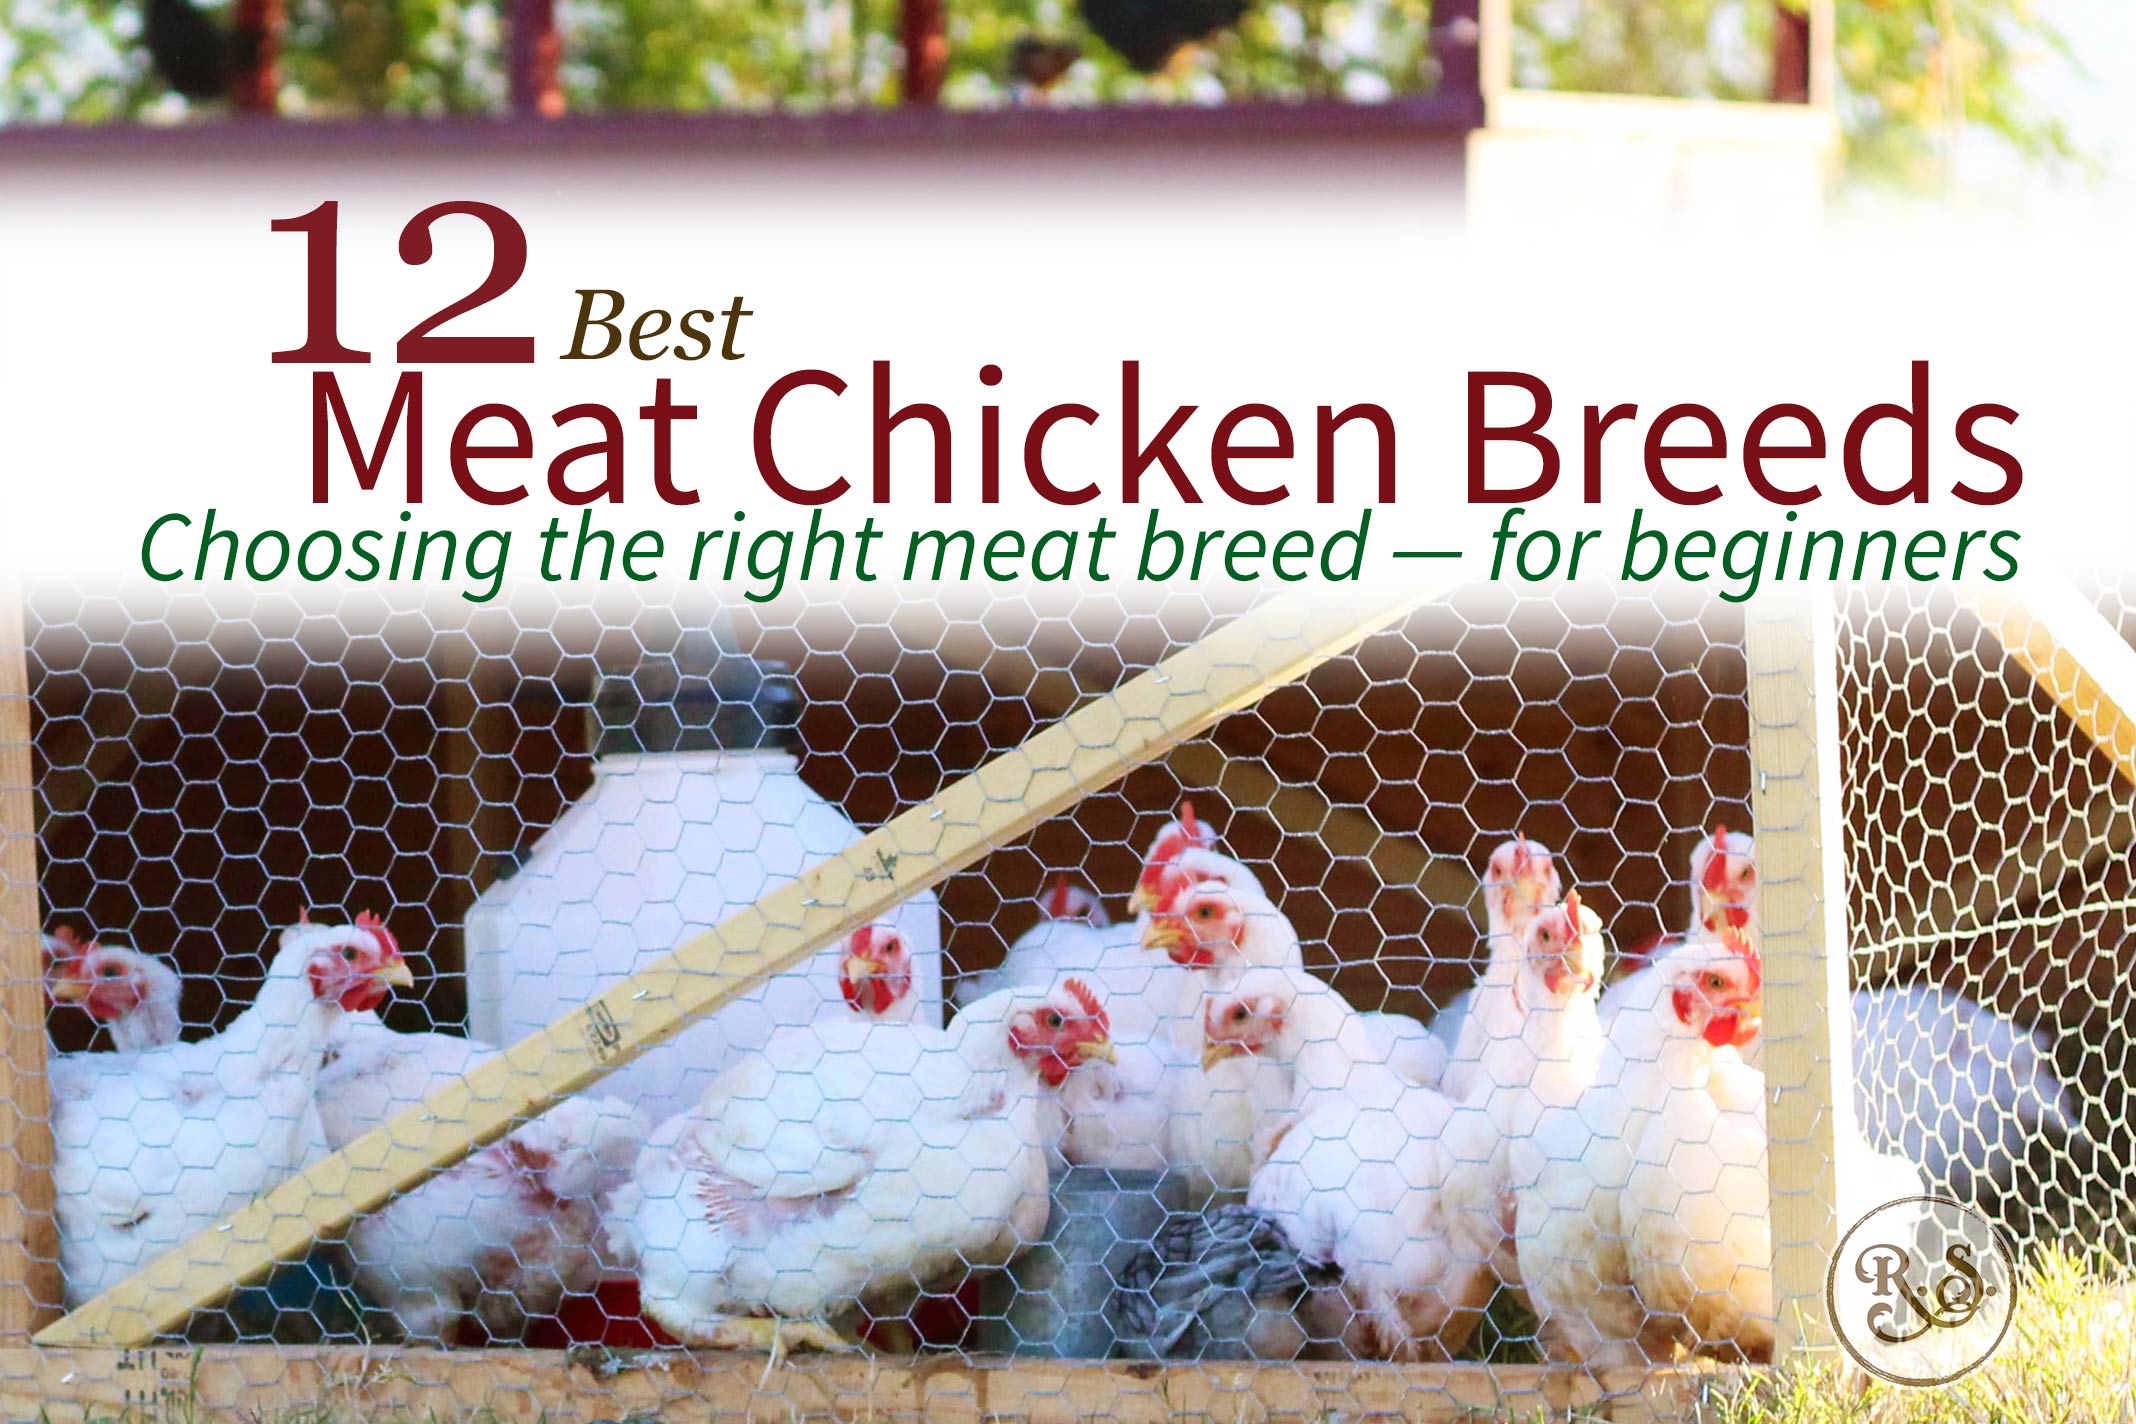 Guide to Choosing Chicken Breeds: Pick the Best Breeds for Your